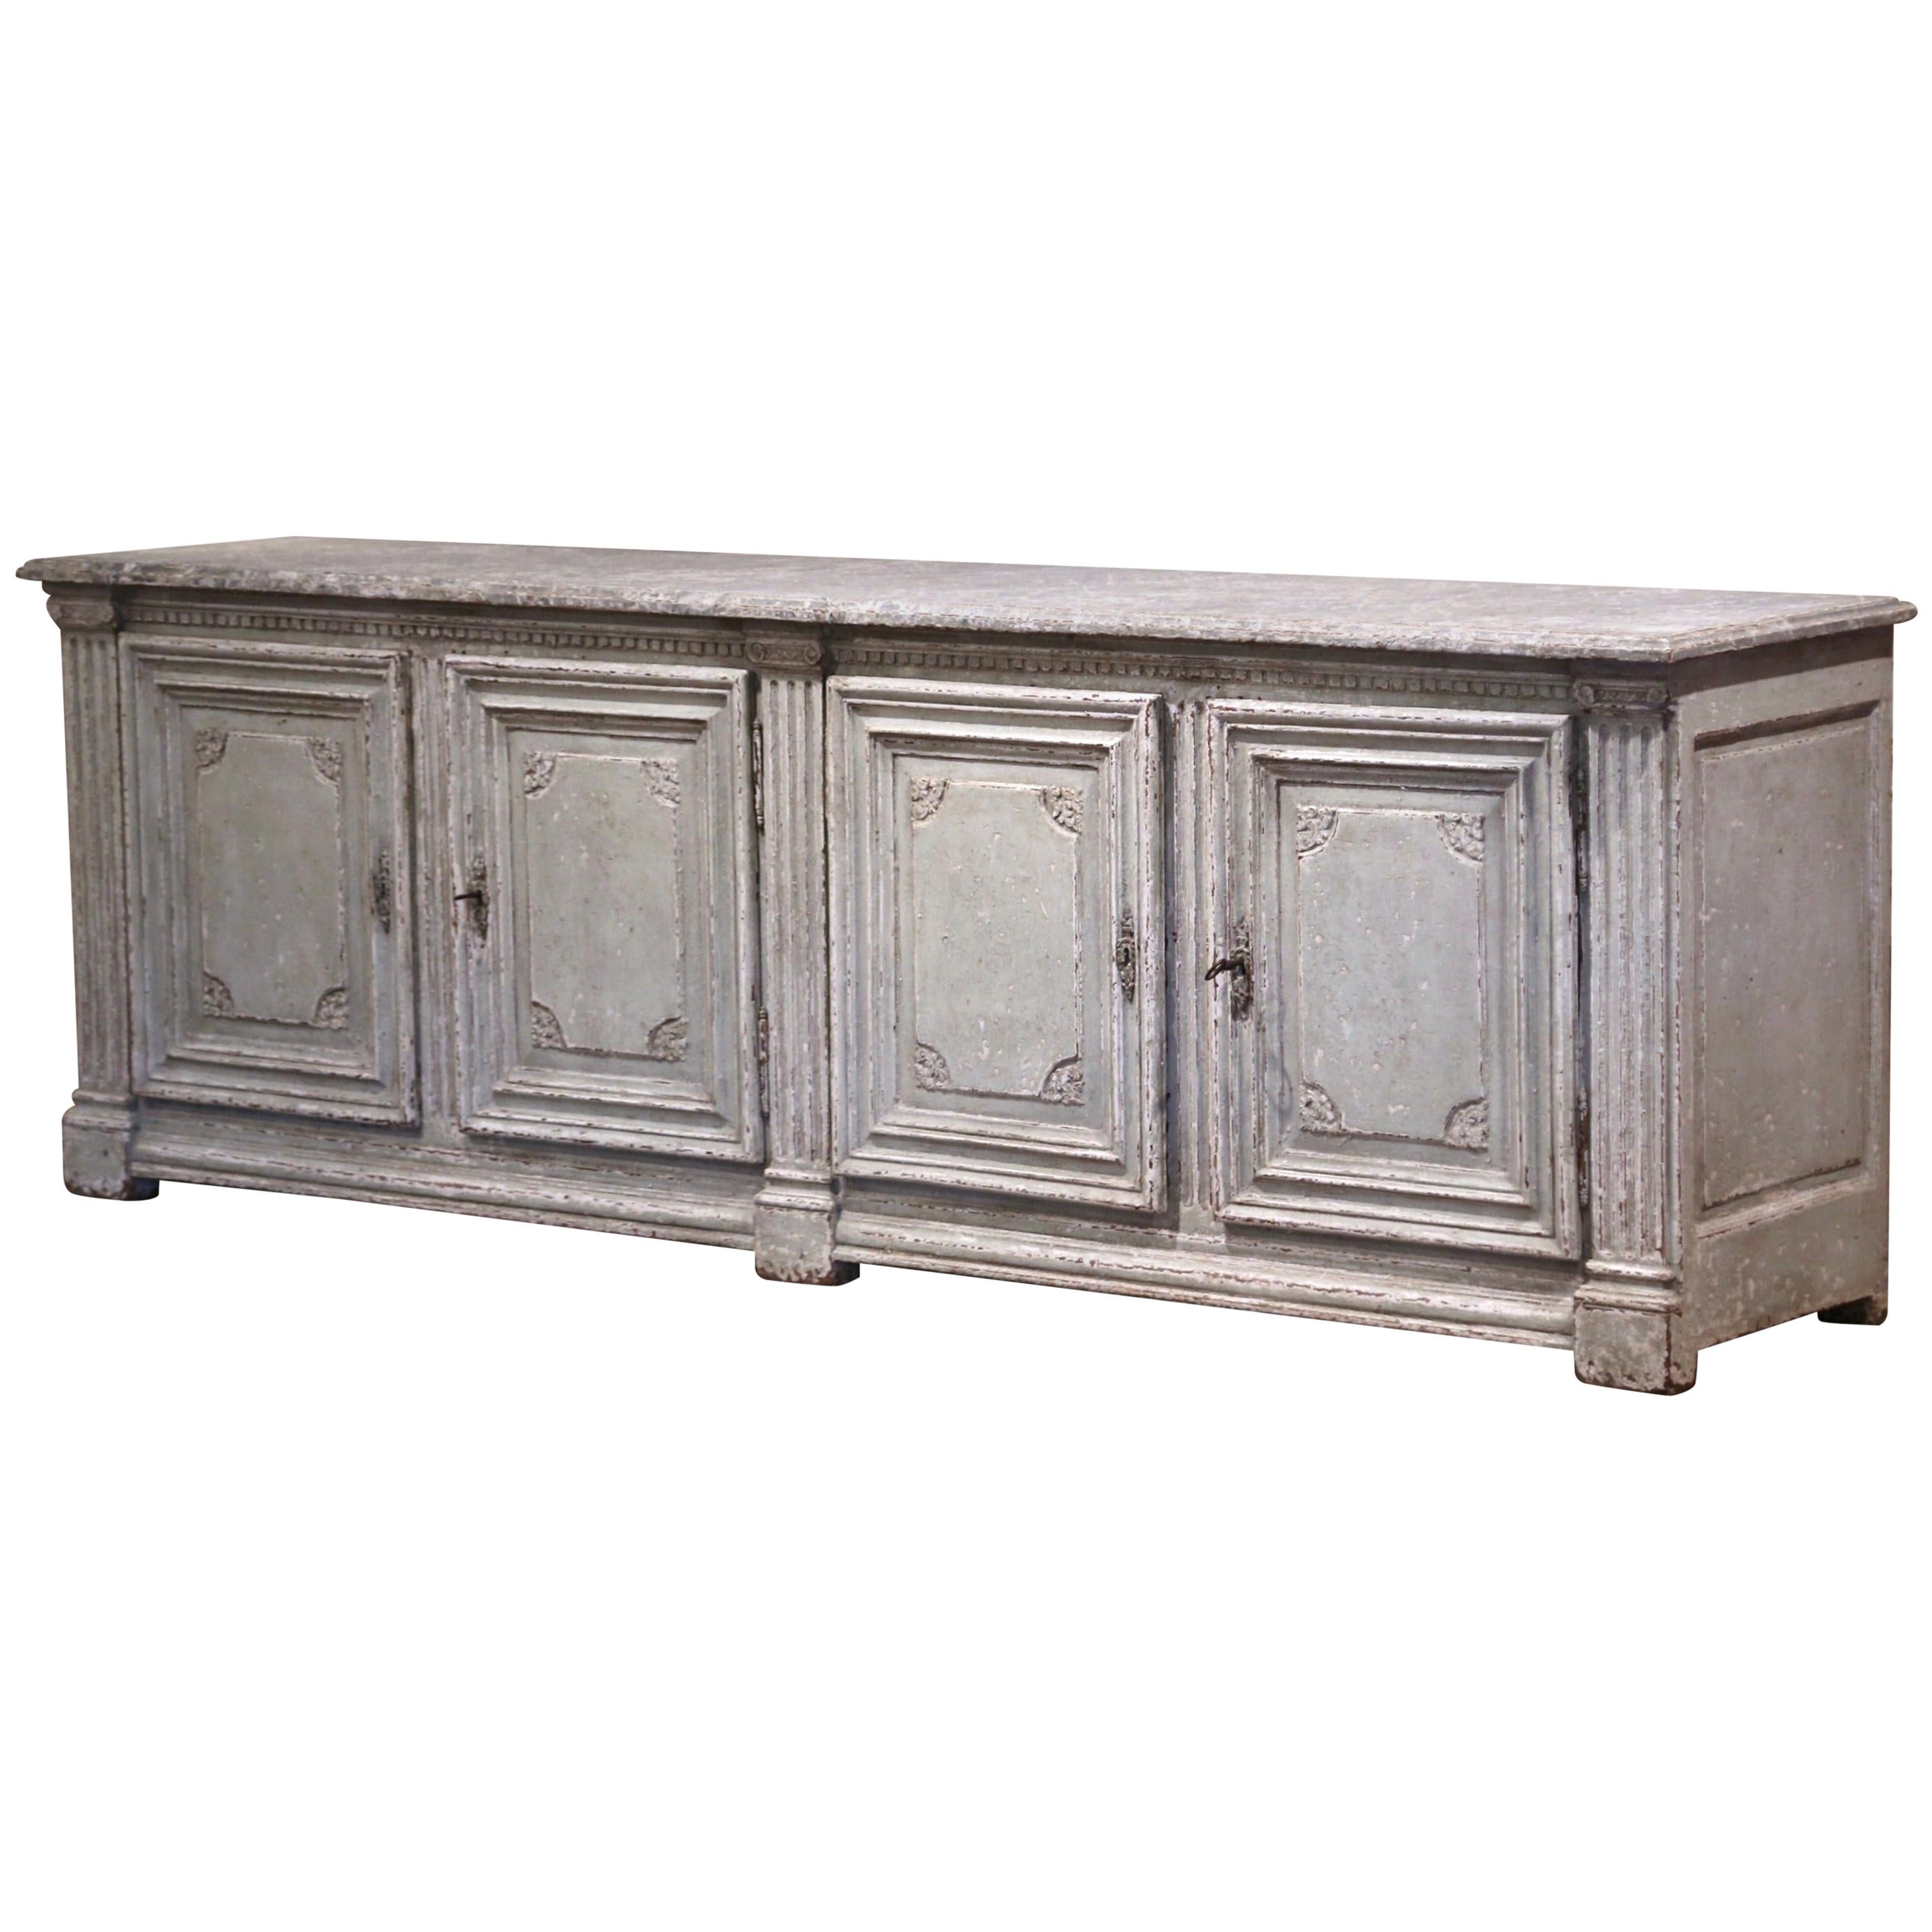 19th Century French Louis XIV Painted Four-Door Buffet with Faux Marble Top